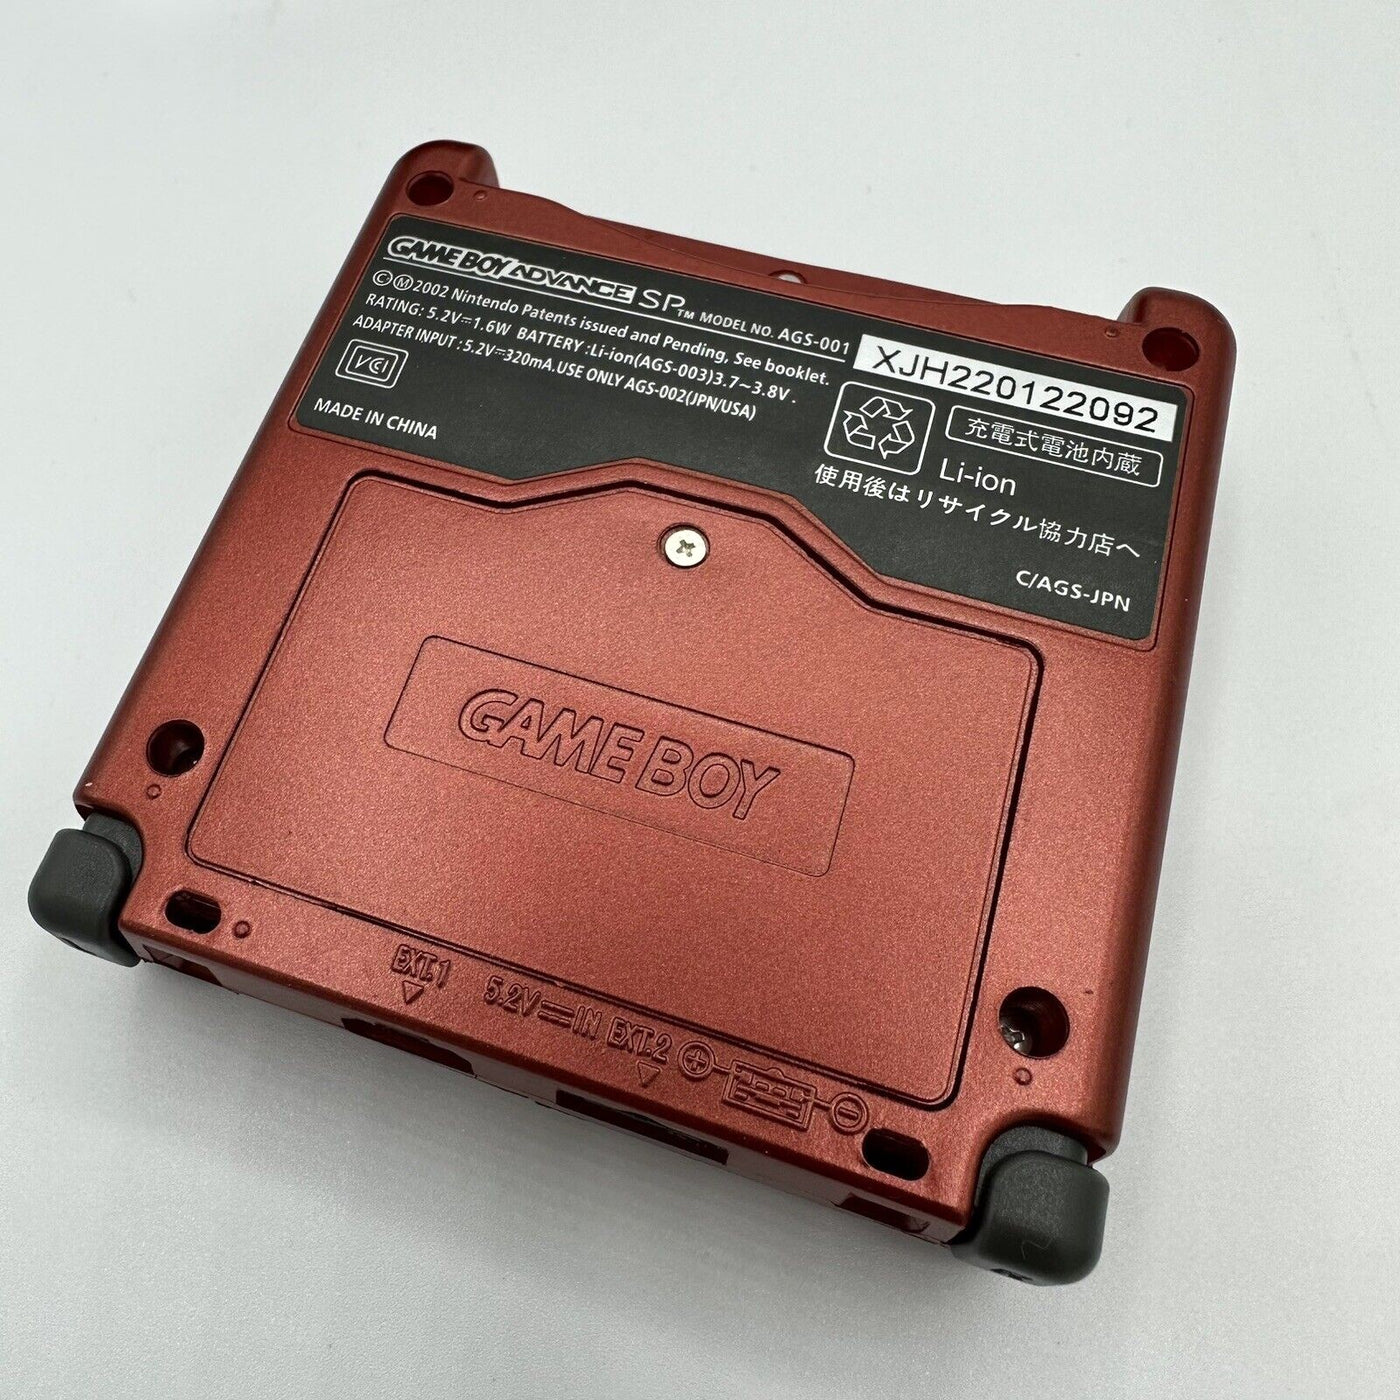 Game Boy Advance SP Console - Groudon Ruby Edition